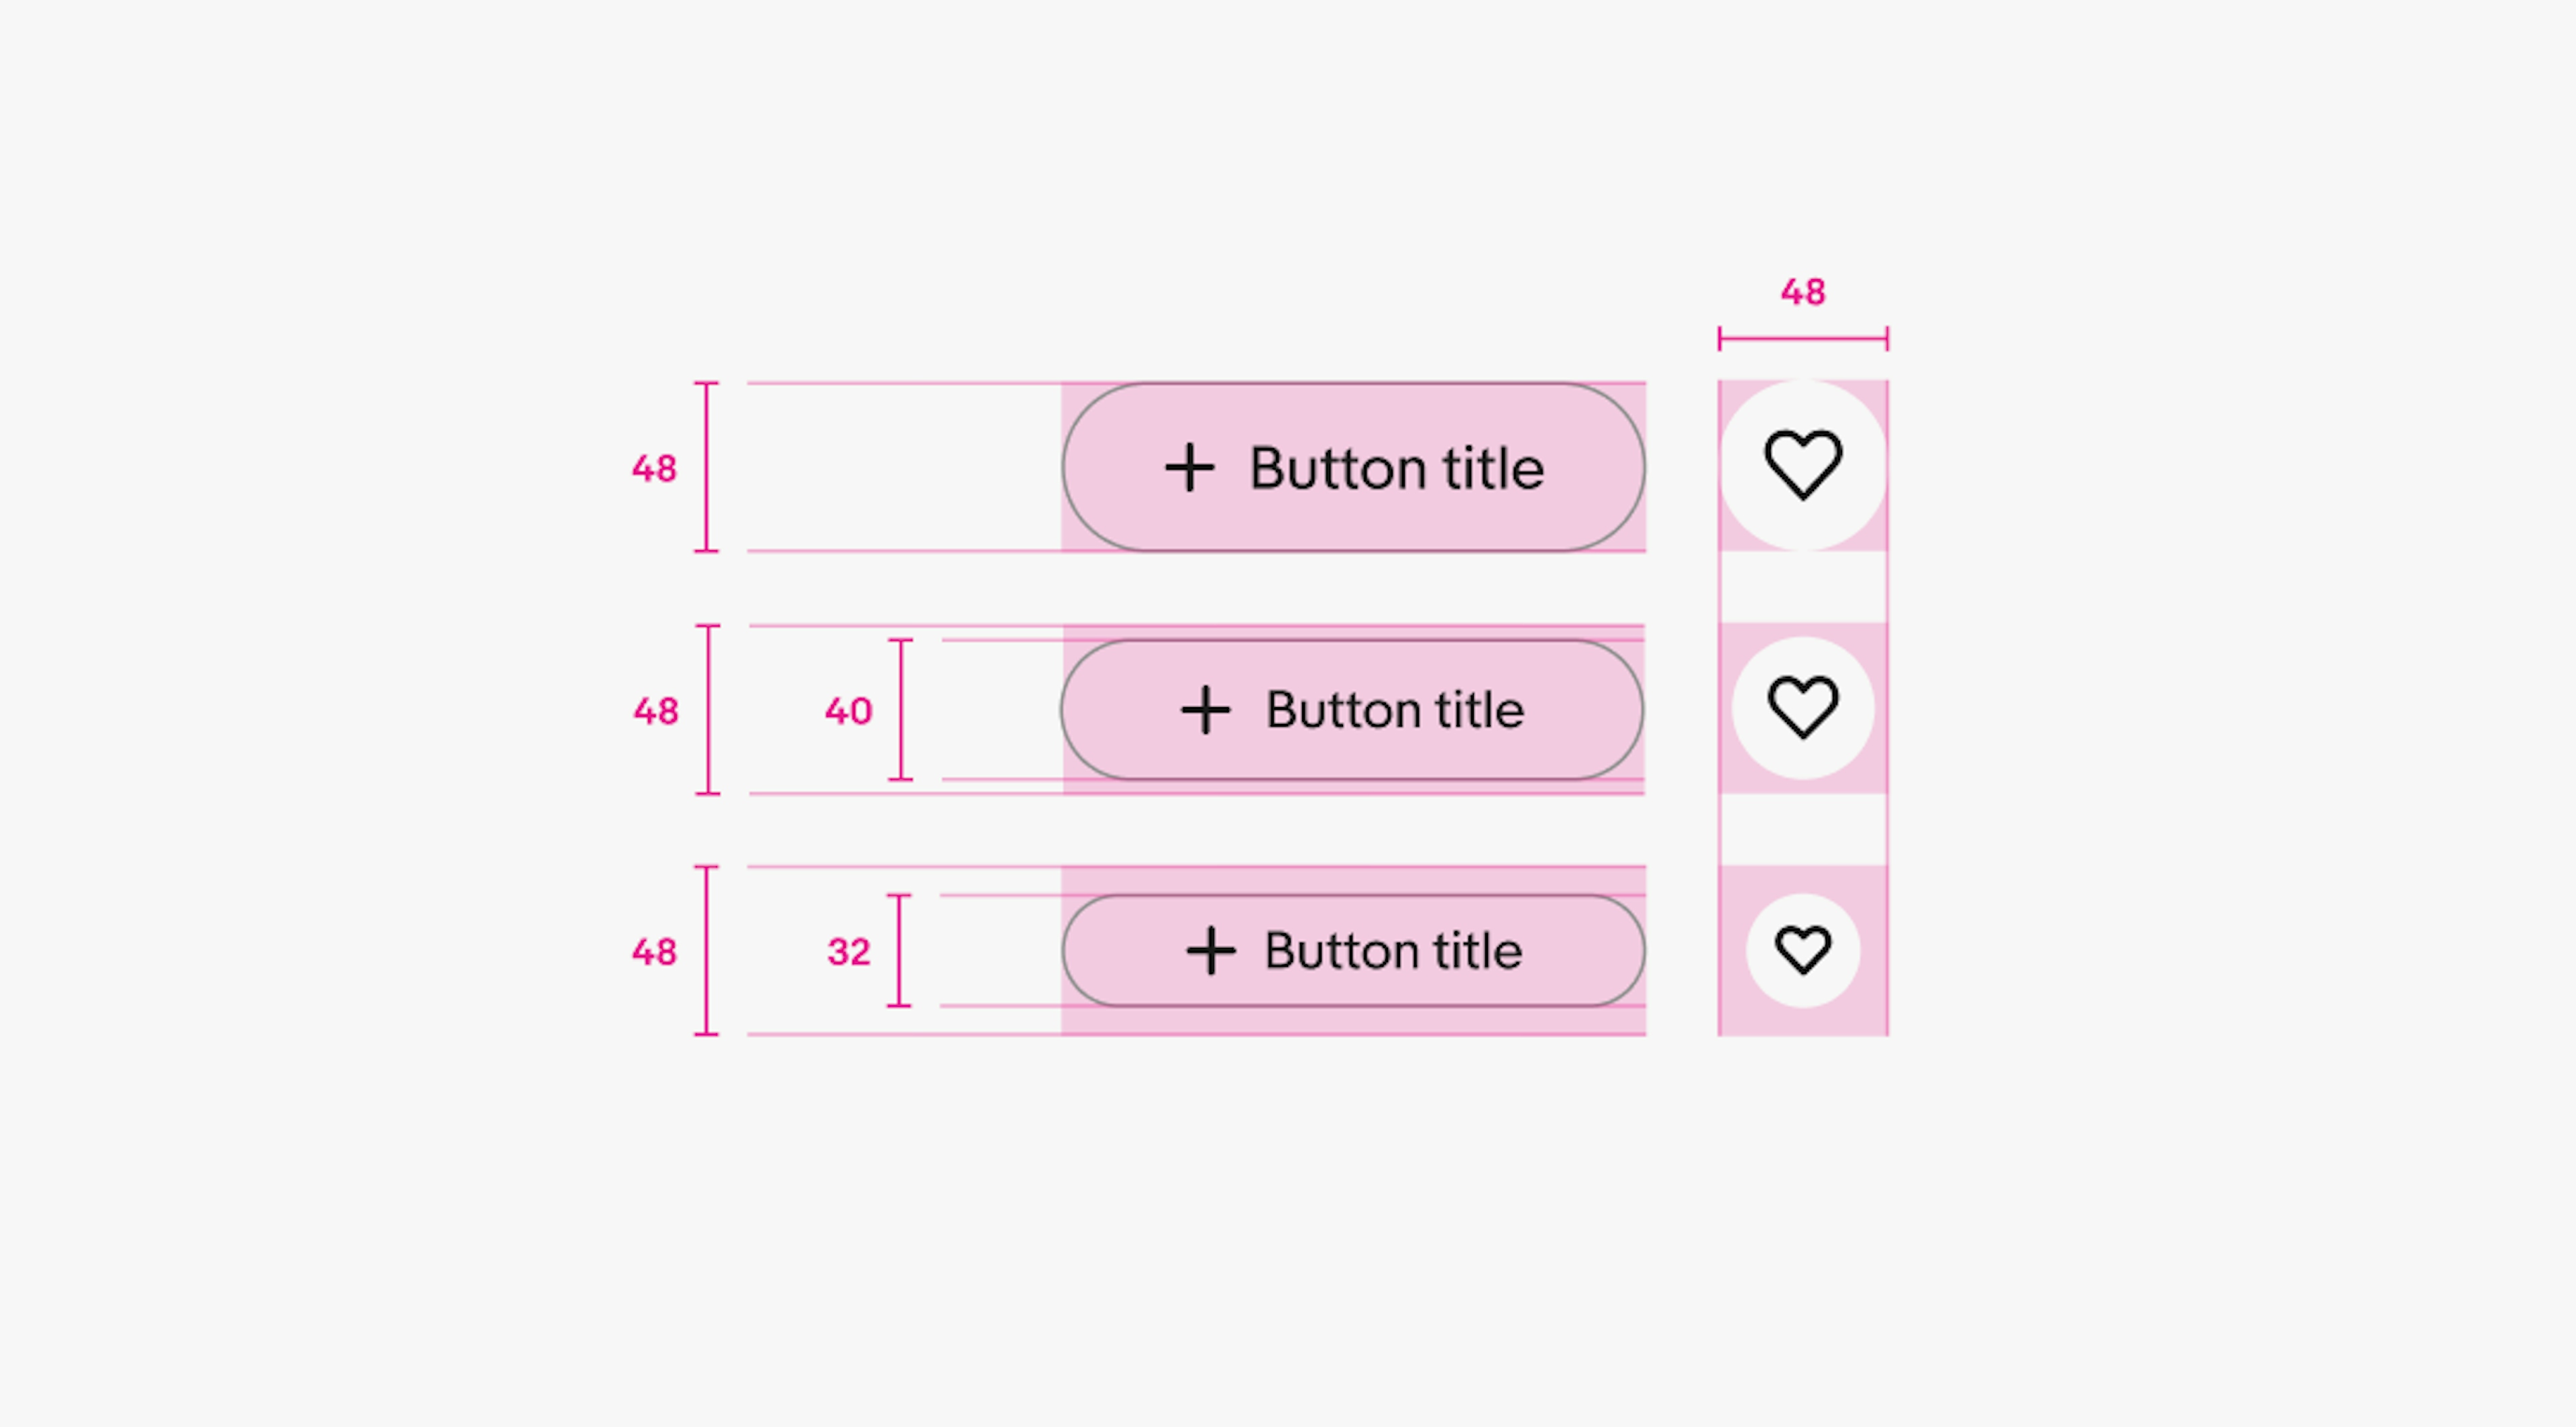 Buttons with different sizes showing the height variations. On the left are 3 CTA buttons at sizes 48, 40, and 32px. A pink overlay highlights the tap target is 48px across each. On the right side are 3 icon buttons at the same sizes with the same 48px tap target highlight.